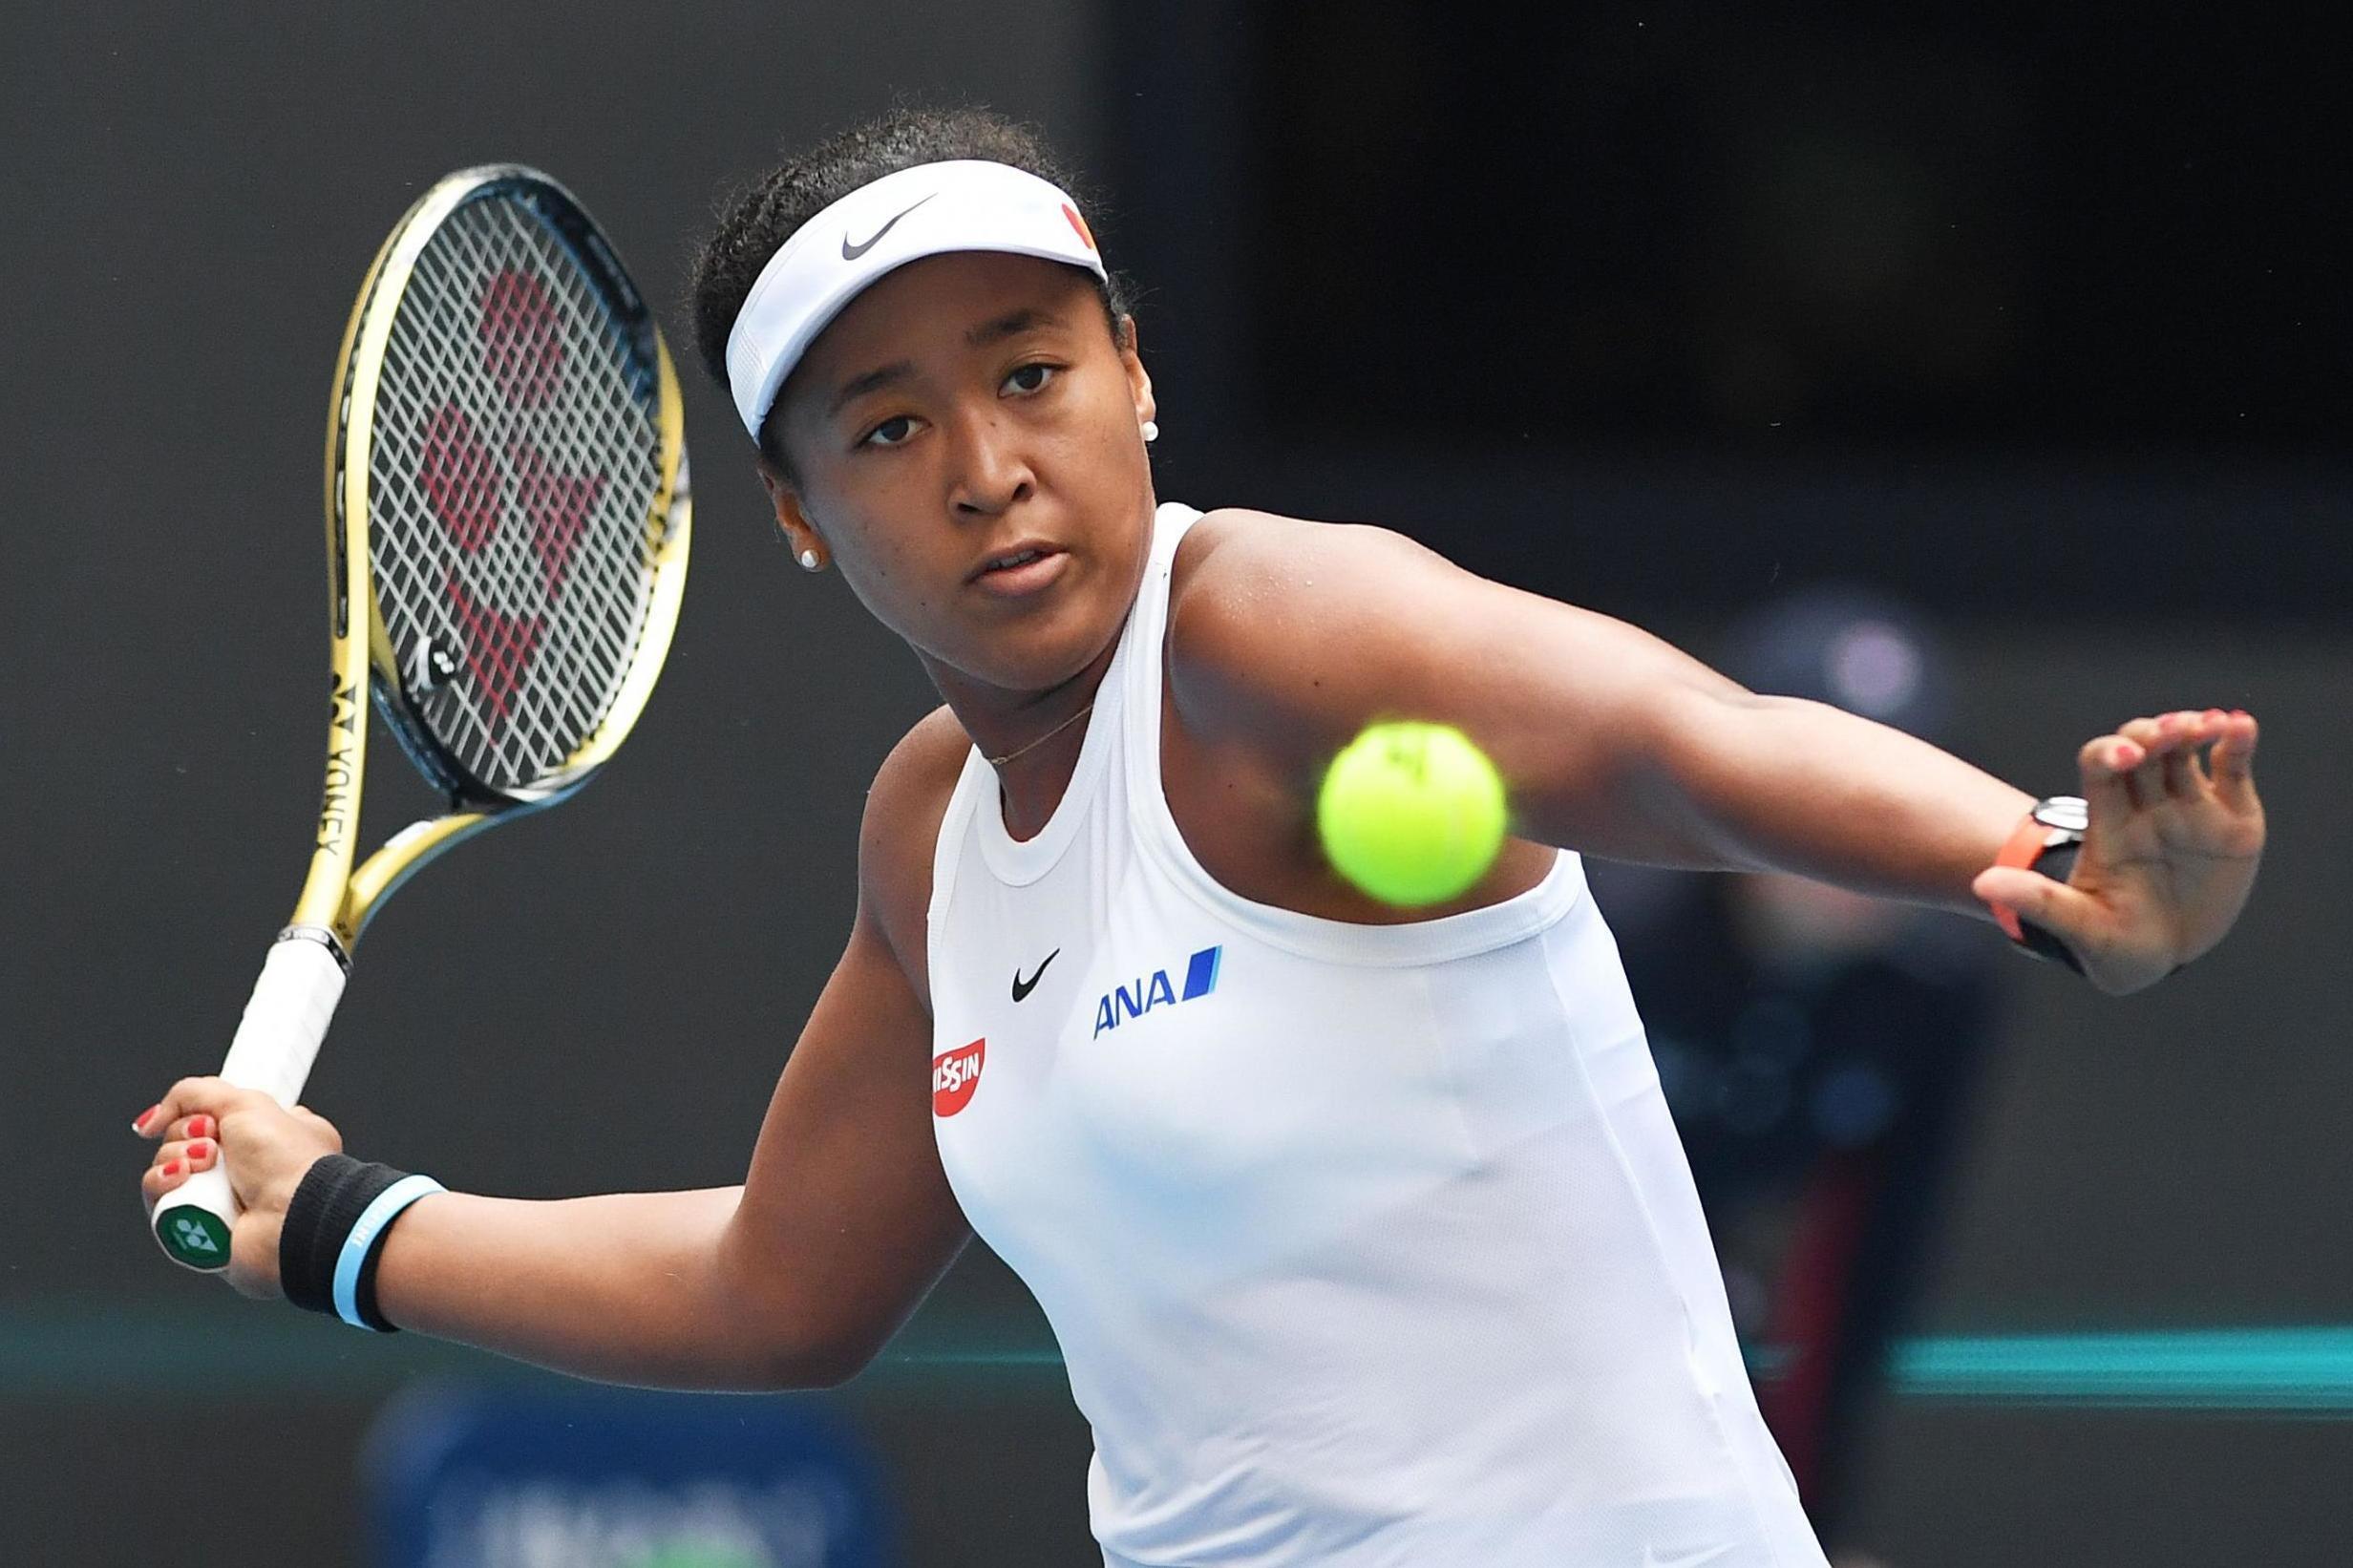 Naomi Osaka calls out critics who shamed her for swimsuit photos: 'Why do you feel like you can comment on what I can wear?'